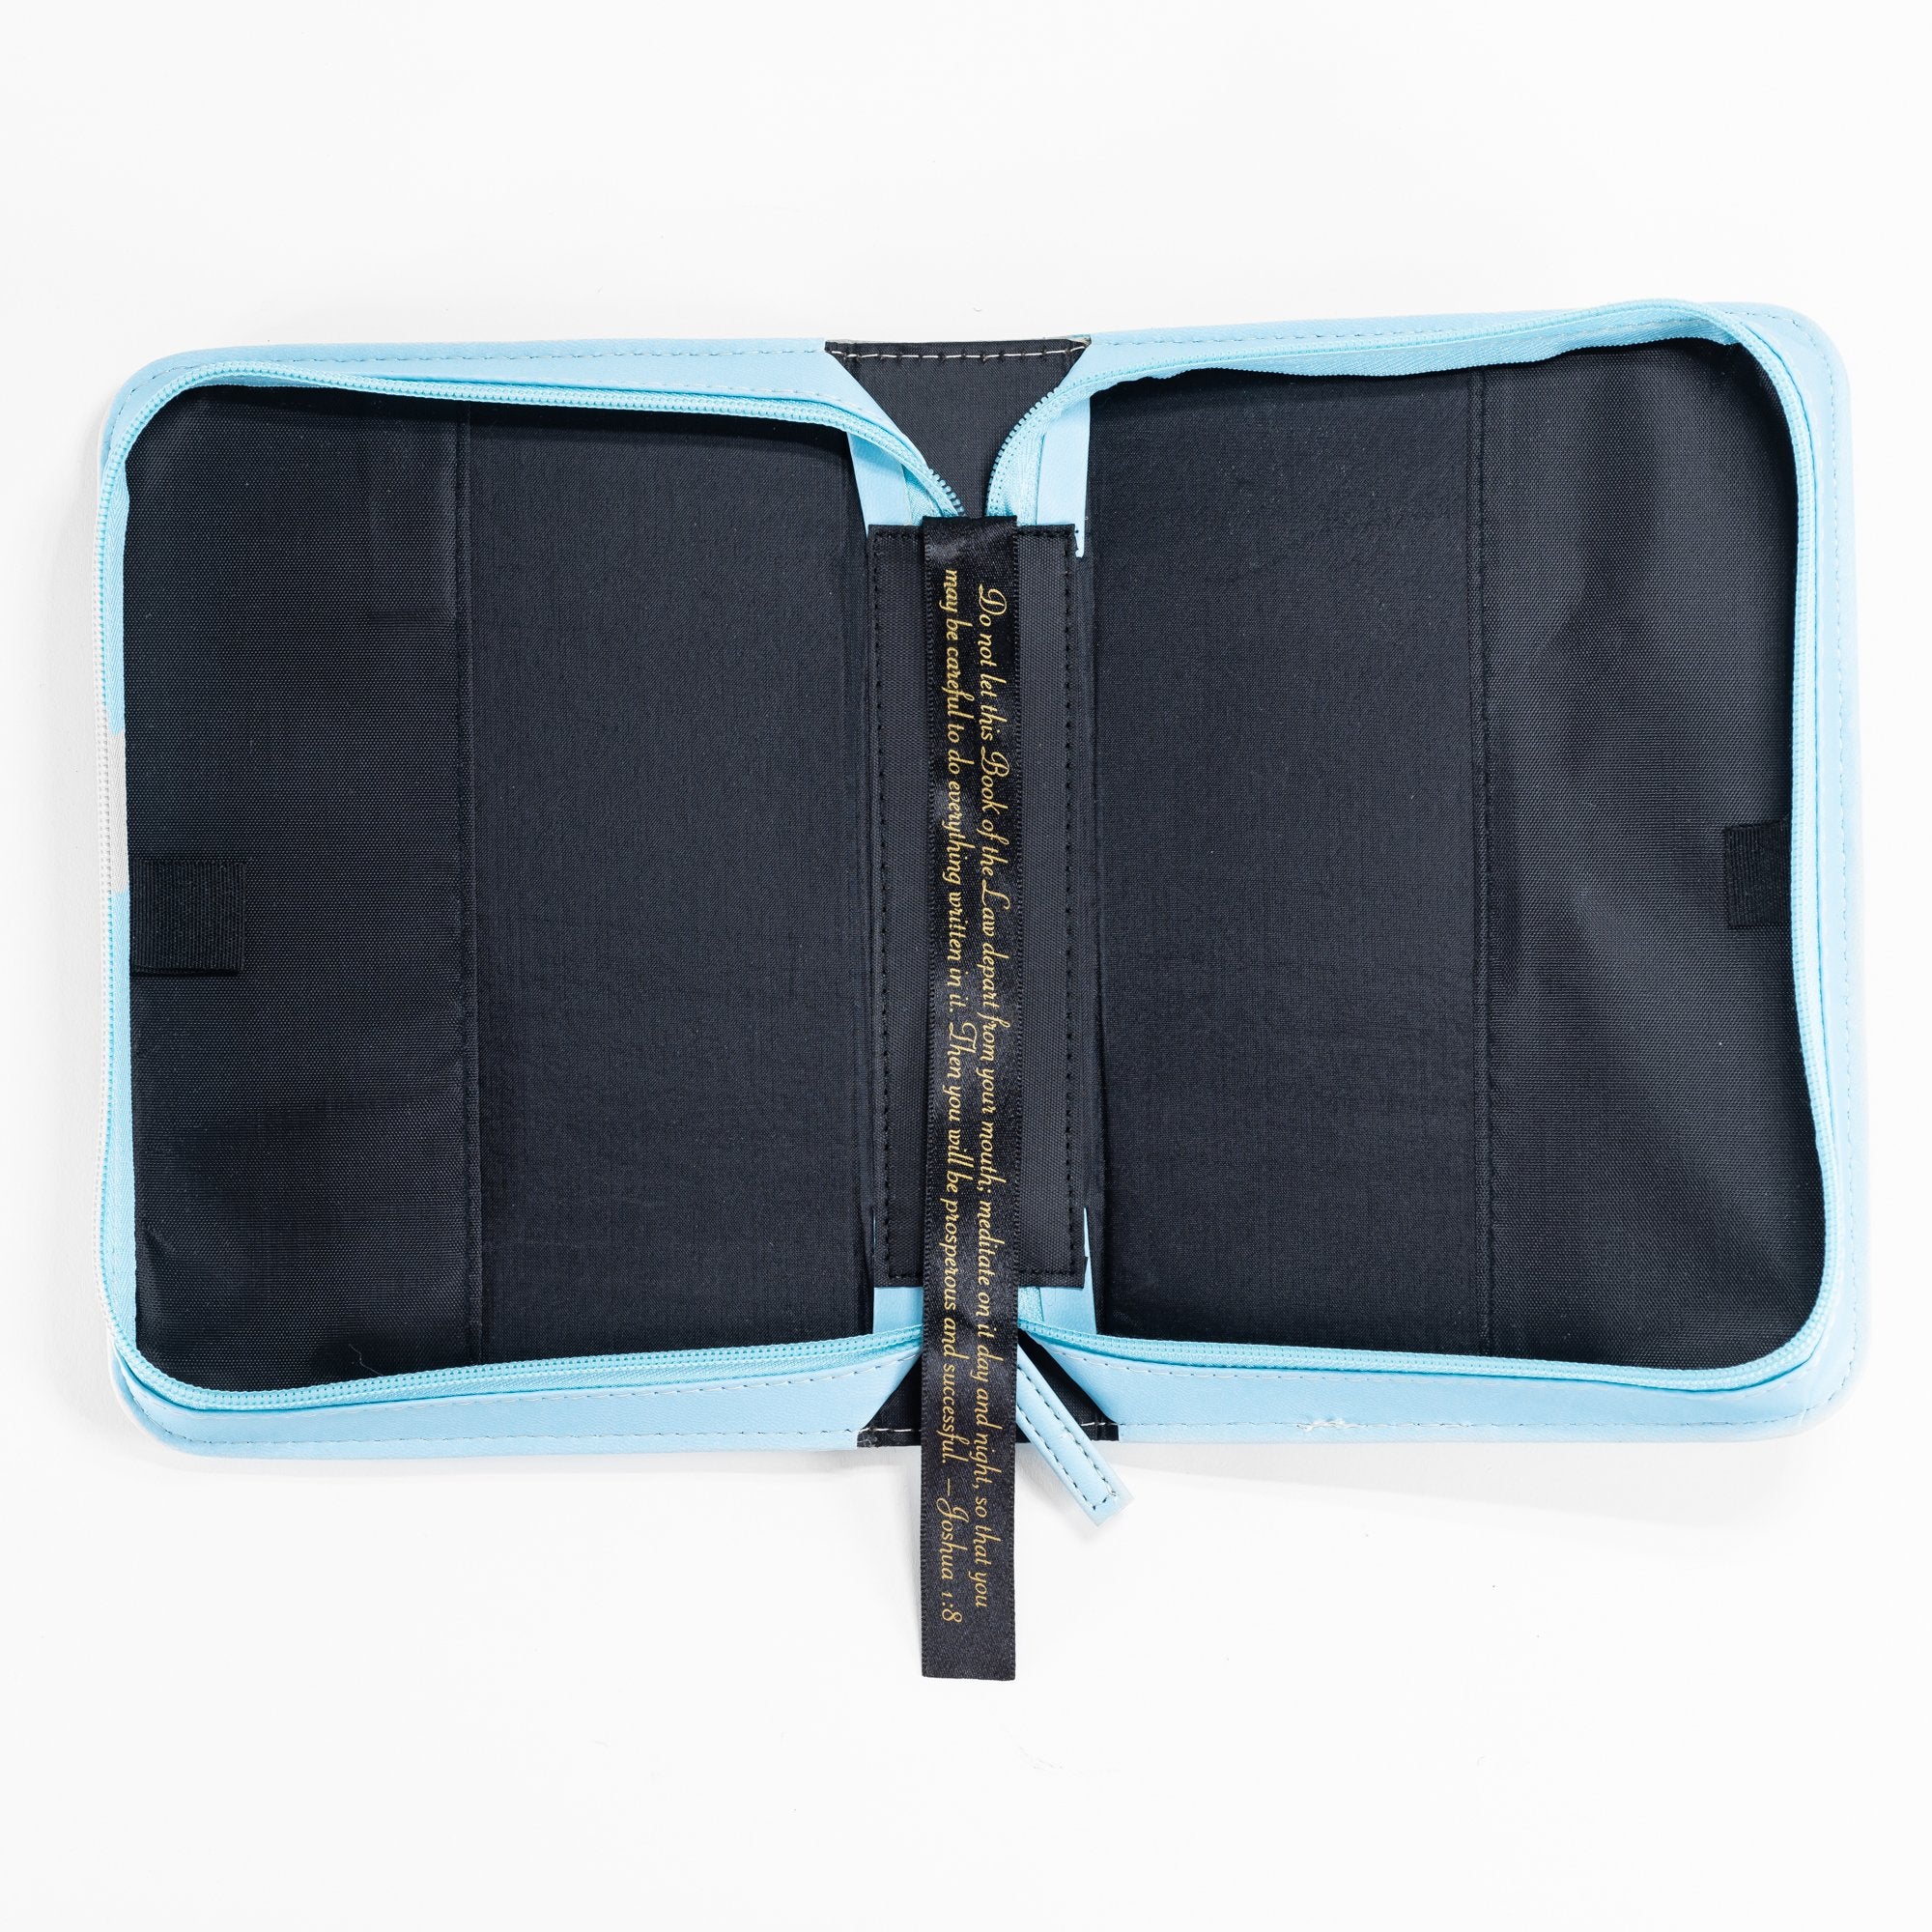 Divine Details: Bible Cover Teal On Teal Matthew 5: 8